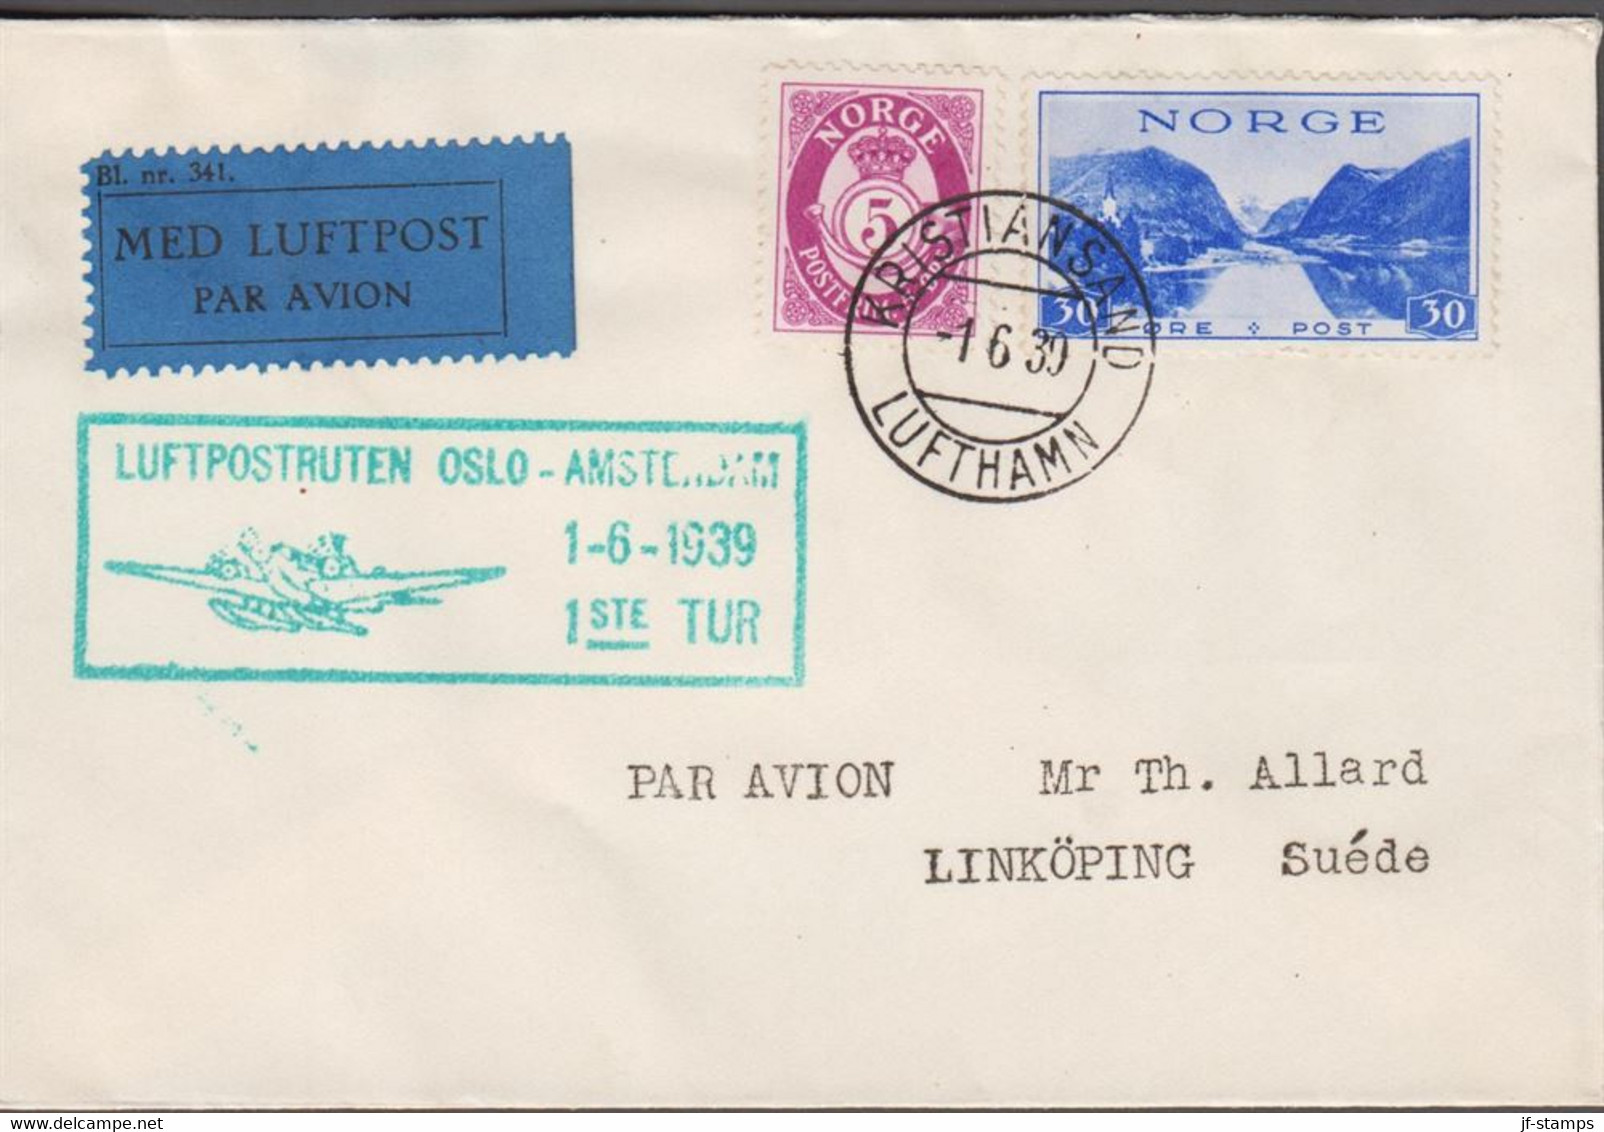 1939. NORGE. 5 ØRE POSTHORN + 30 ØRE TURISME On Small Cover Cancelled LUFTPOSTRUTEN OSLO - A... (Michel 202+) - JF523510 - Covers & Documents